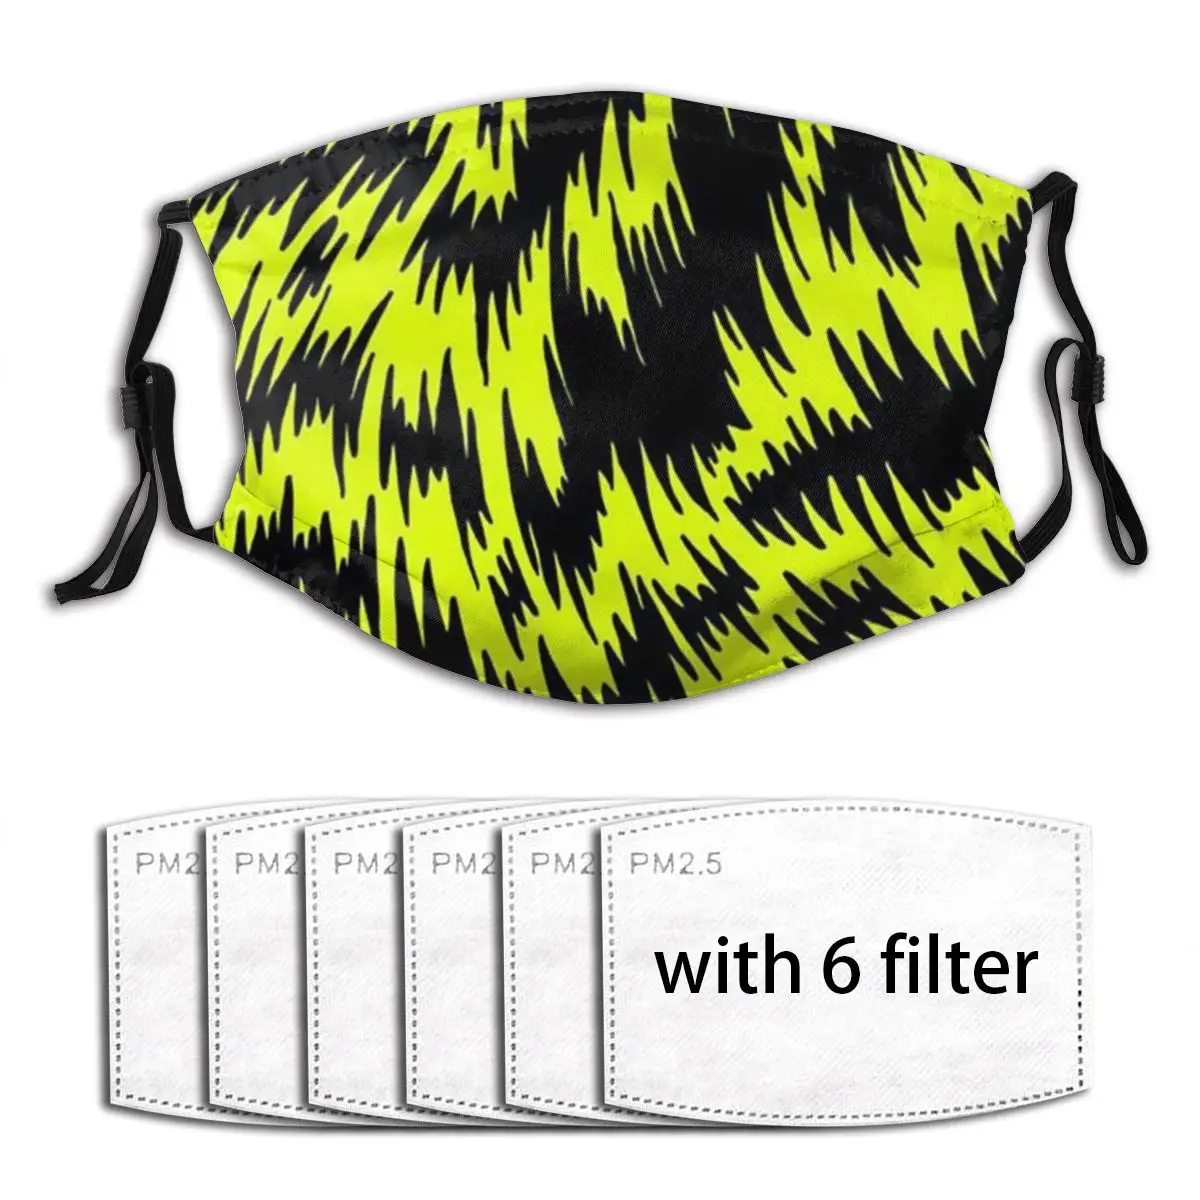 

Windproof Dust Mask with 6 Filter, Yellow Geometric PM2.5 Mouth Face Mask Washable Reusable Anti Pollution Dust